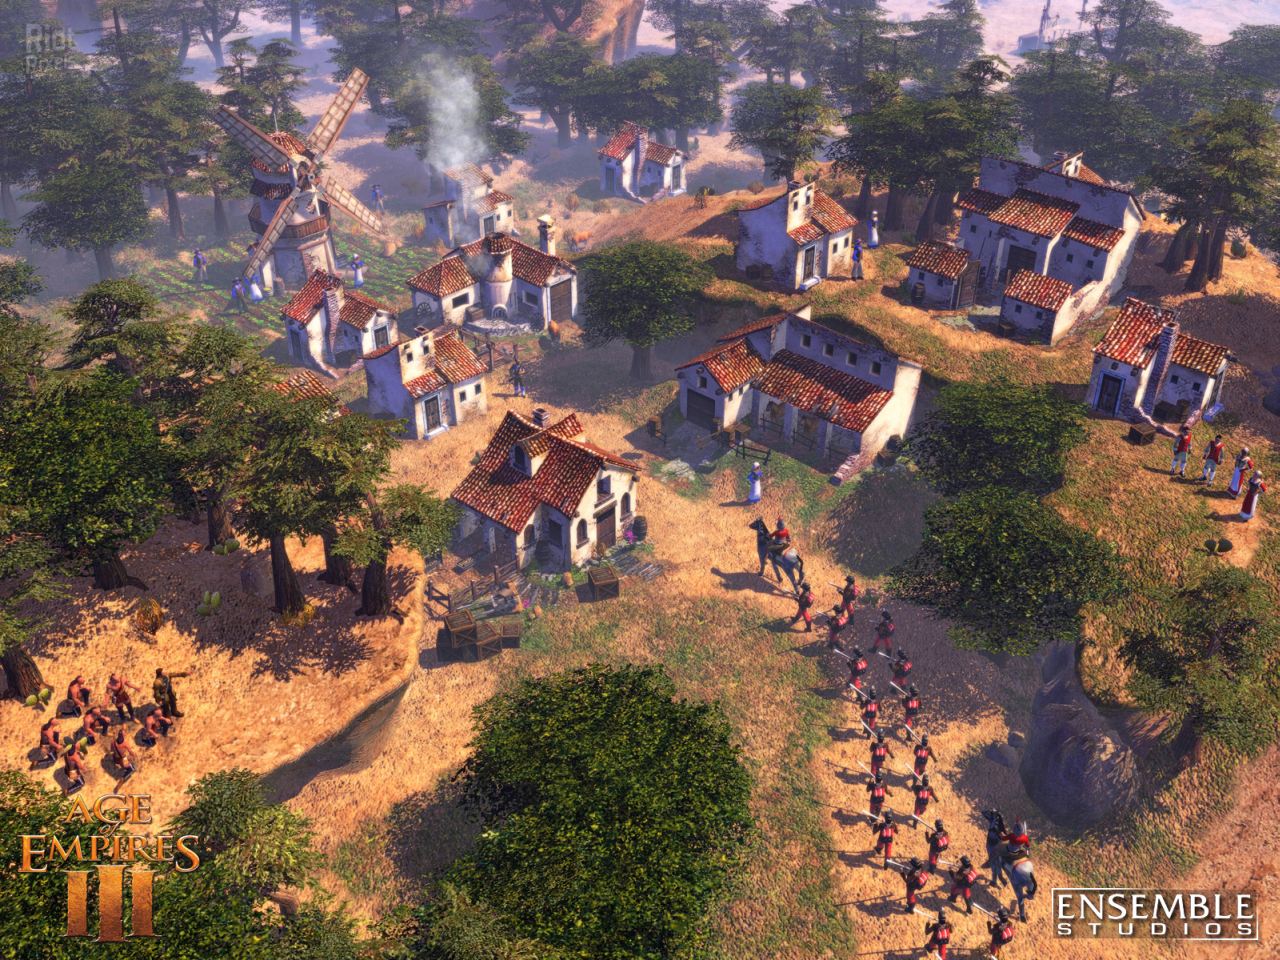 age of empires iii asian dynasties crack download